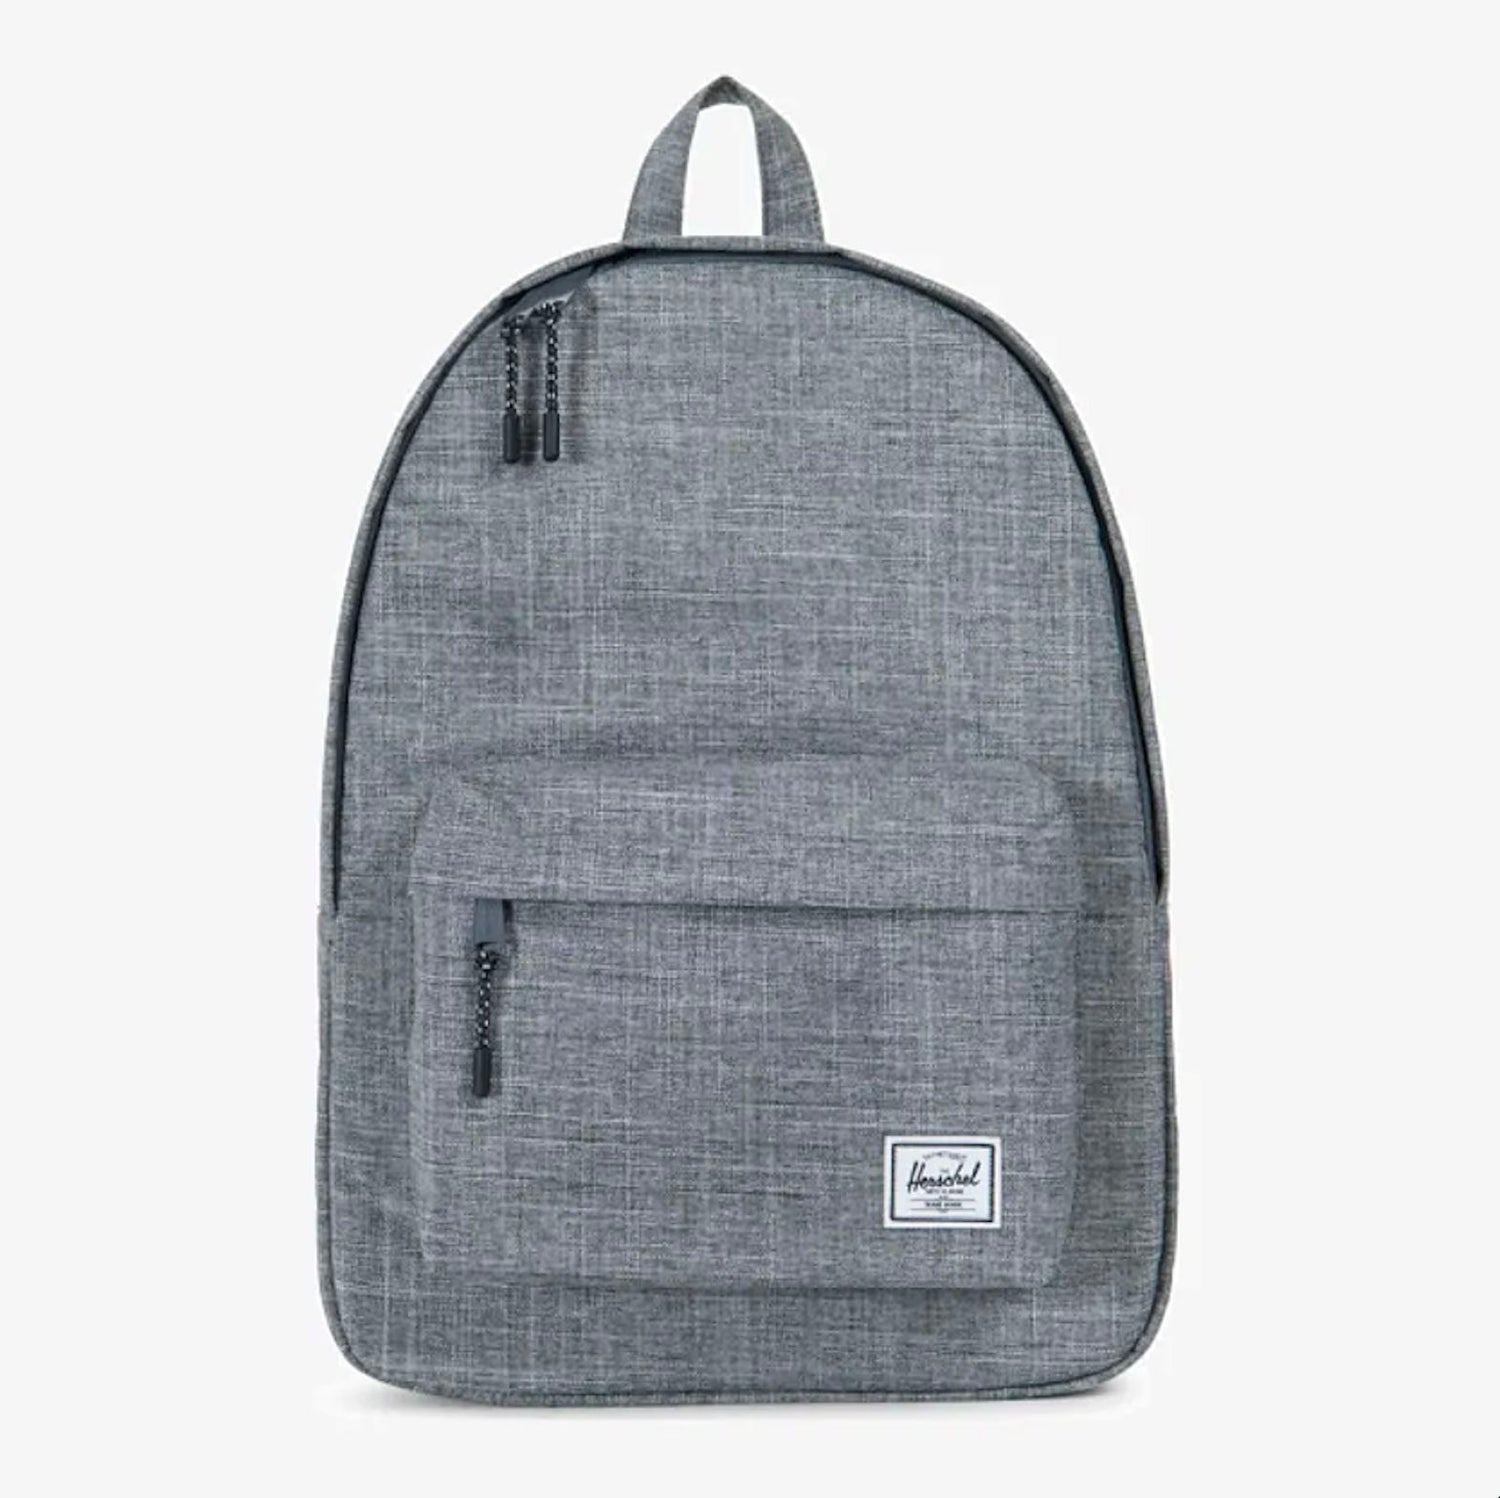 Herschel Classic Backpack Charcoal Single Color 